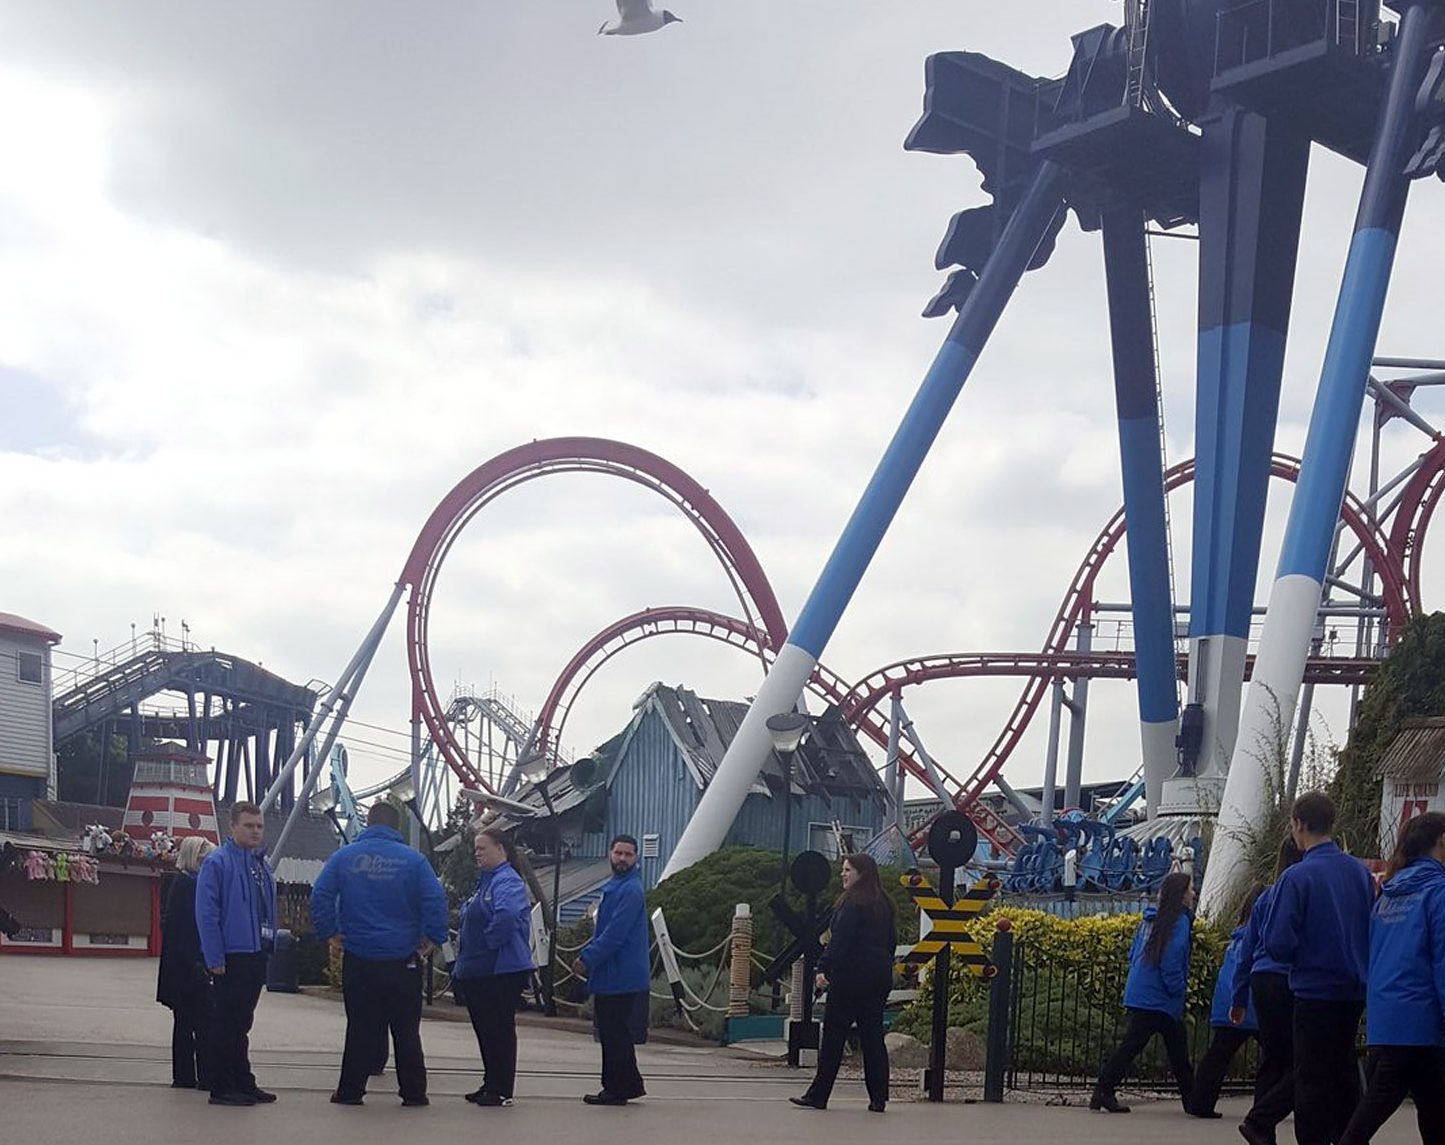 The scene at Drayton Manor Theme Park after 11-year-old Evha was airlifted to hospital after falling from the Splash Canyon water ride (Jade Braham/PA Wire)